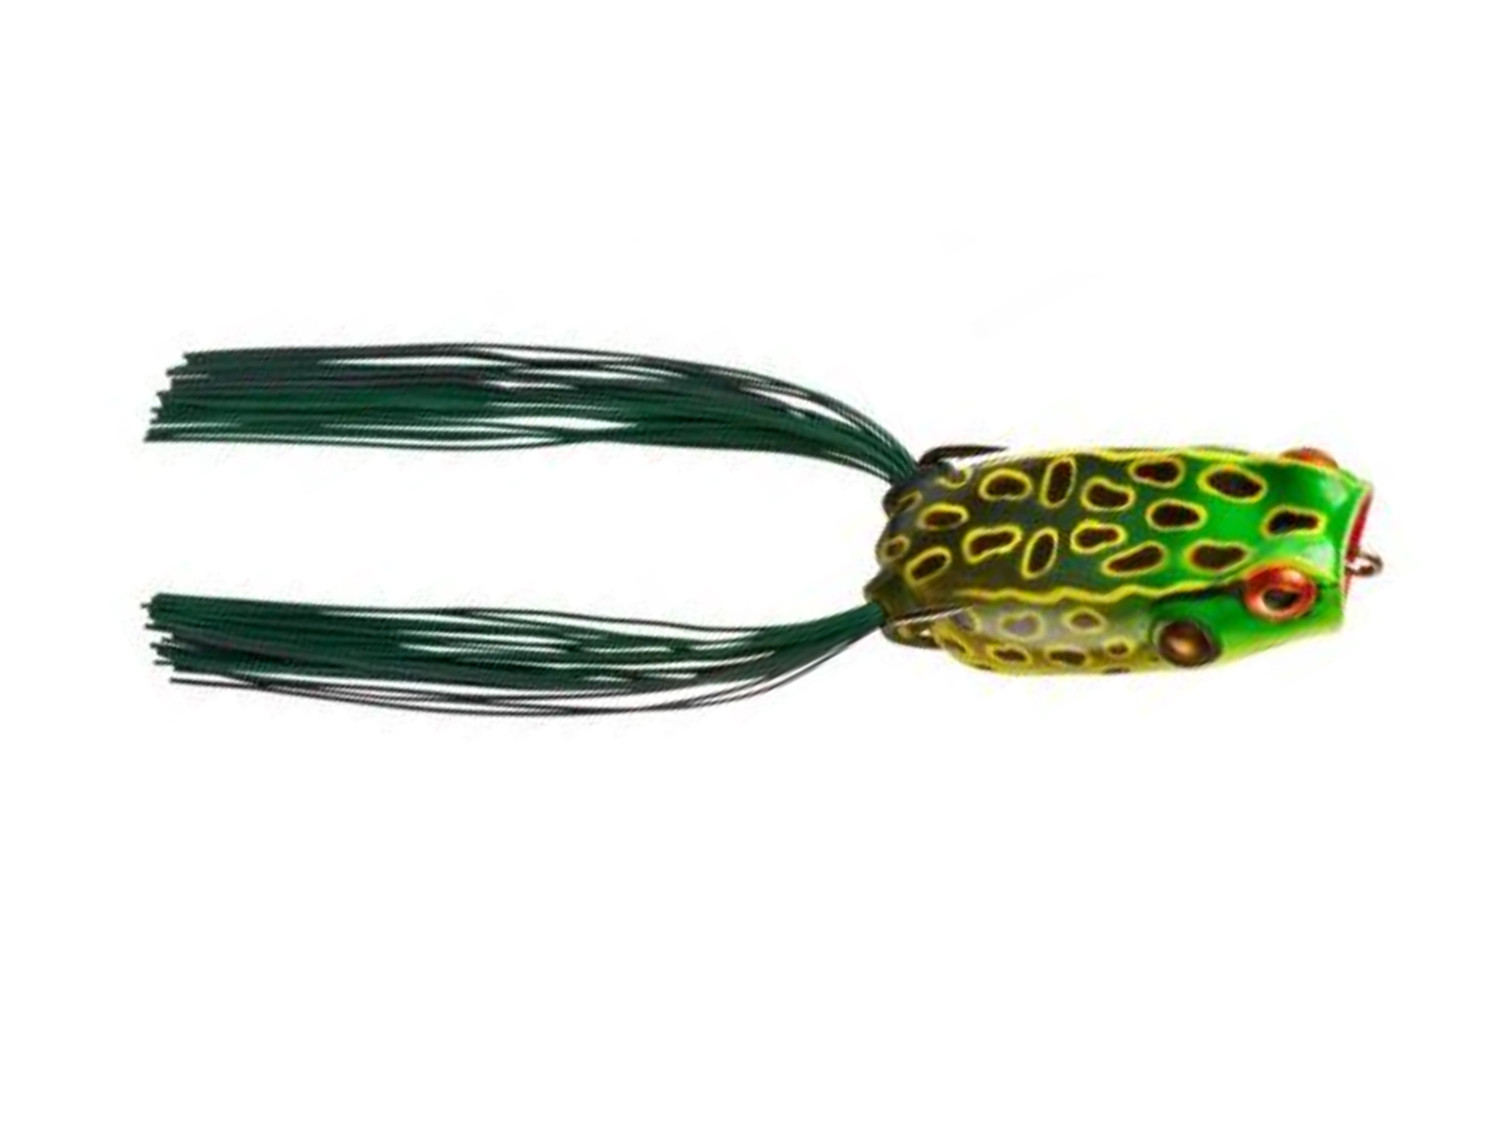 BYPC3 Booyah 2.5 Pad Crasher Albino Frog Fishing Lure for sale online